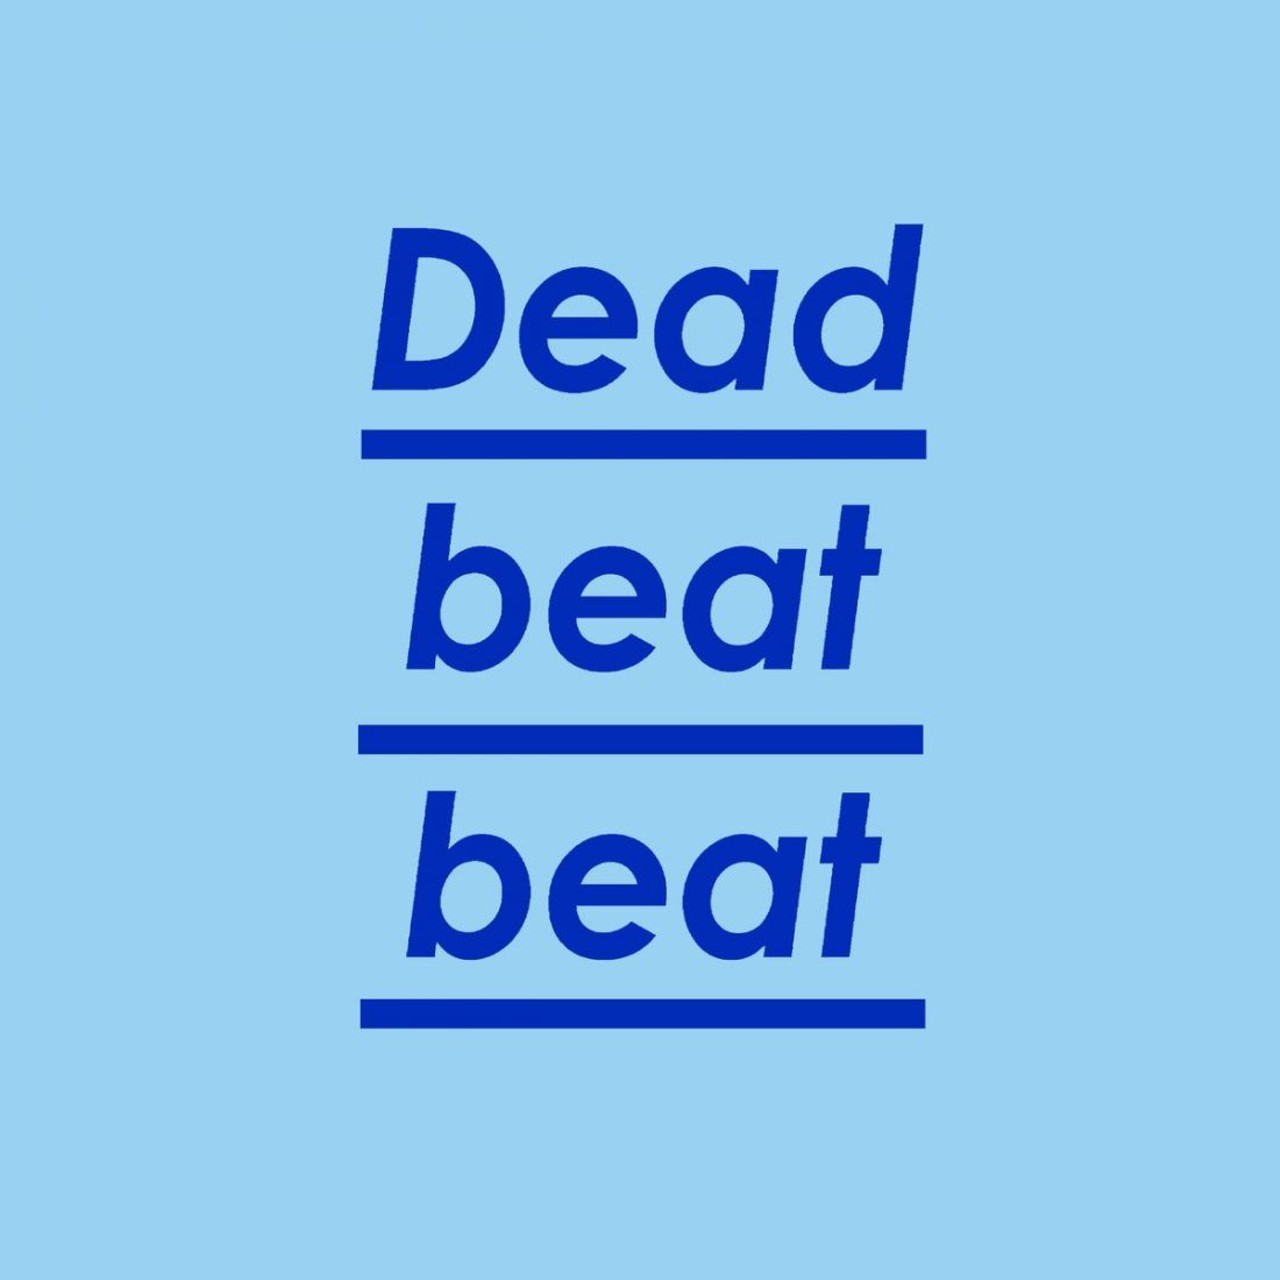 2. Deadbeat Beat | You Lift Me Up
DIYers and lo-fi pop revivalists Deadbeat Beat might be the most Detroit sounding band from Detroit &#151; and for that we couldn't be more thankful. The band's current incarnation &#151; Alex Glendening on guitar, Zak Frieling, on bass, and Maria Nuccilli on drums &#151; has a penchant for soaring pop harmonies and beachy Velvet Underground vibes, dropping the sunshine-heavy "You Lift Me Up" while we waited for the vinyl reissue of its 2011 cassette When I Talk to You. The production is piercing in its simplicity, allowing for a song that makes us forget just how fucked up the world is. Make-out to freak-out, Deadbeat Beat just gets us.